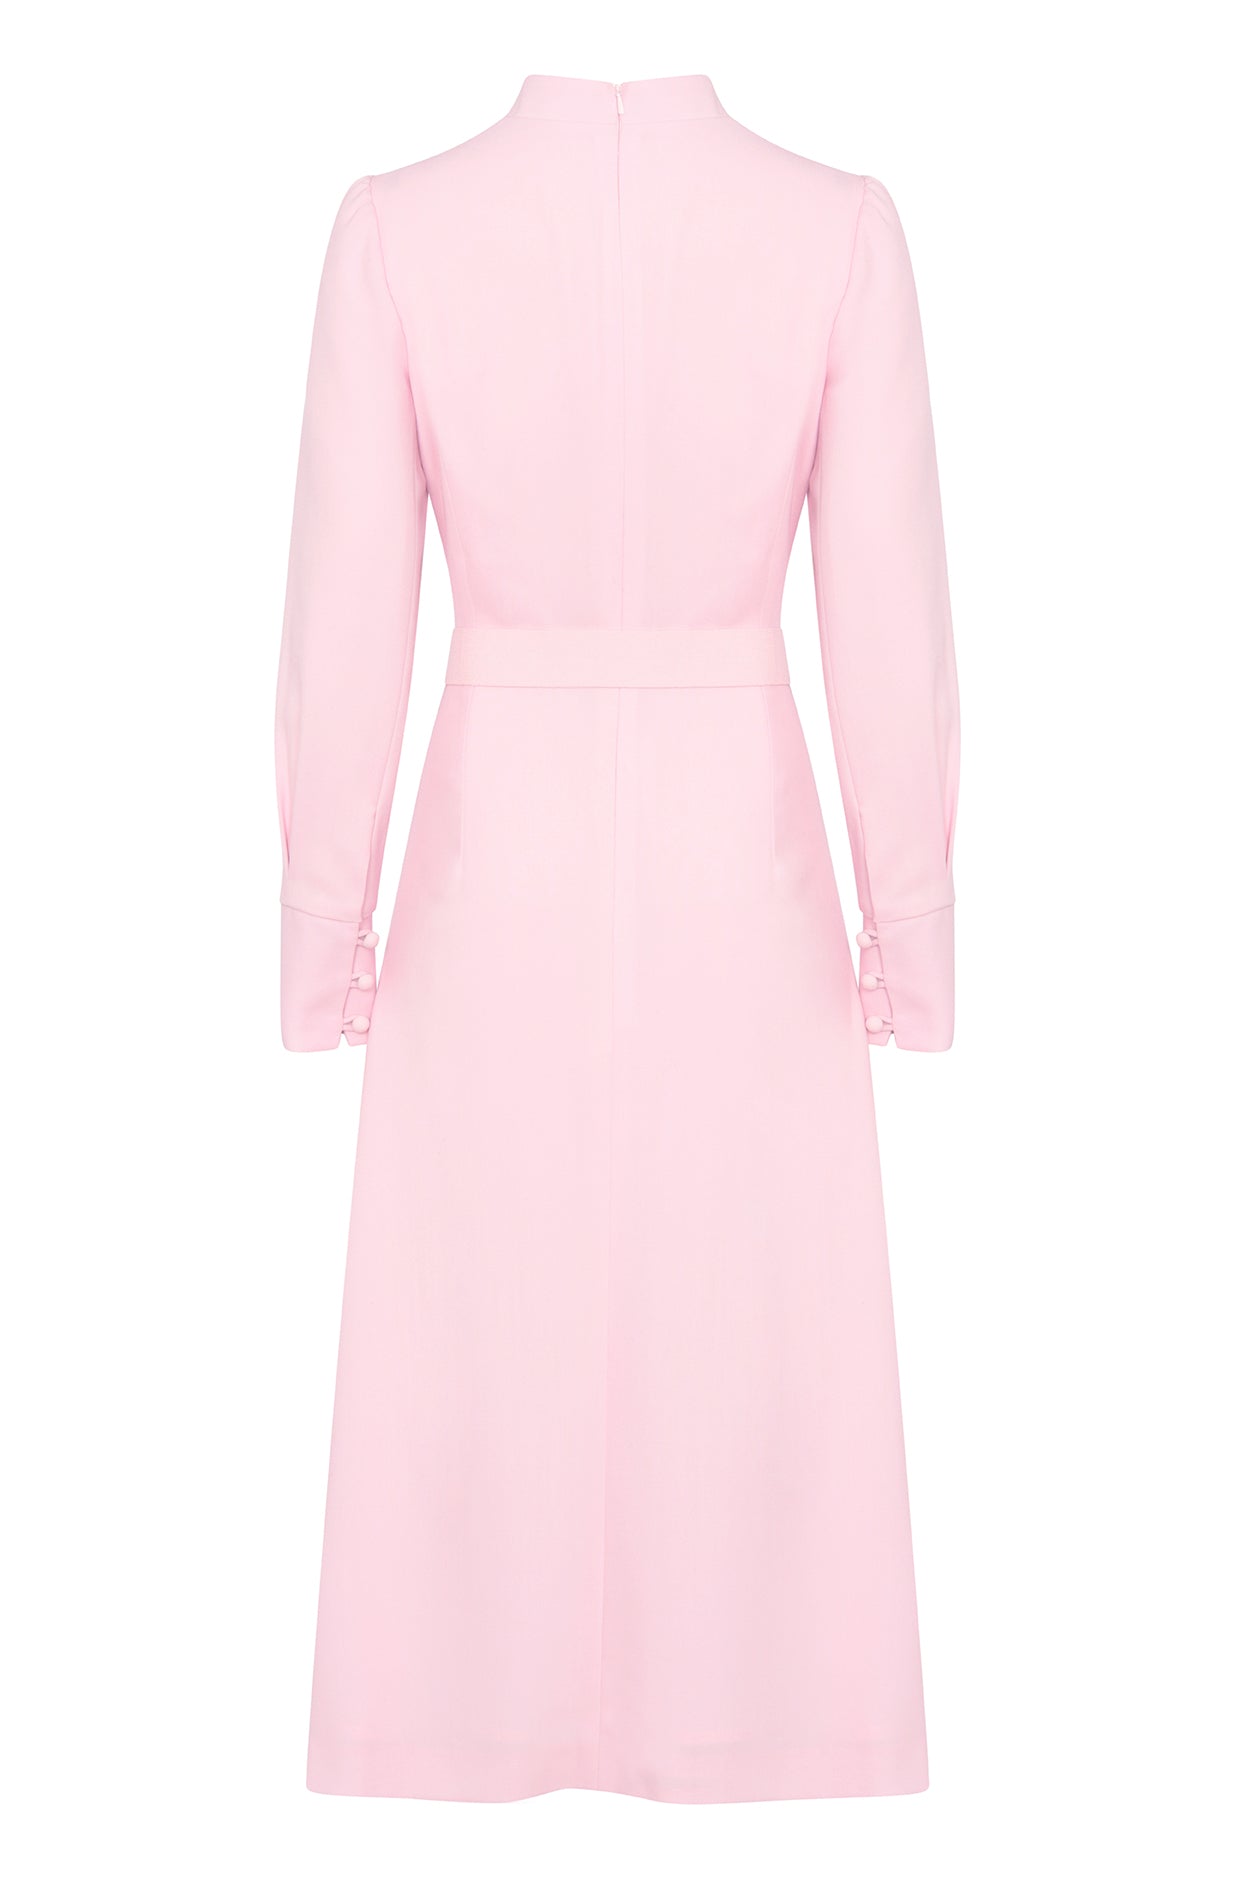 Long Sleeved Midi Dress in Pale Pink Wool Crepe Cady - Cleo